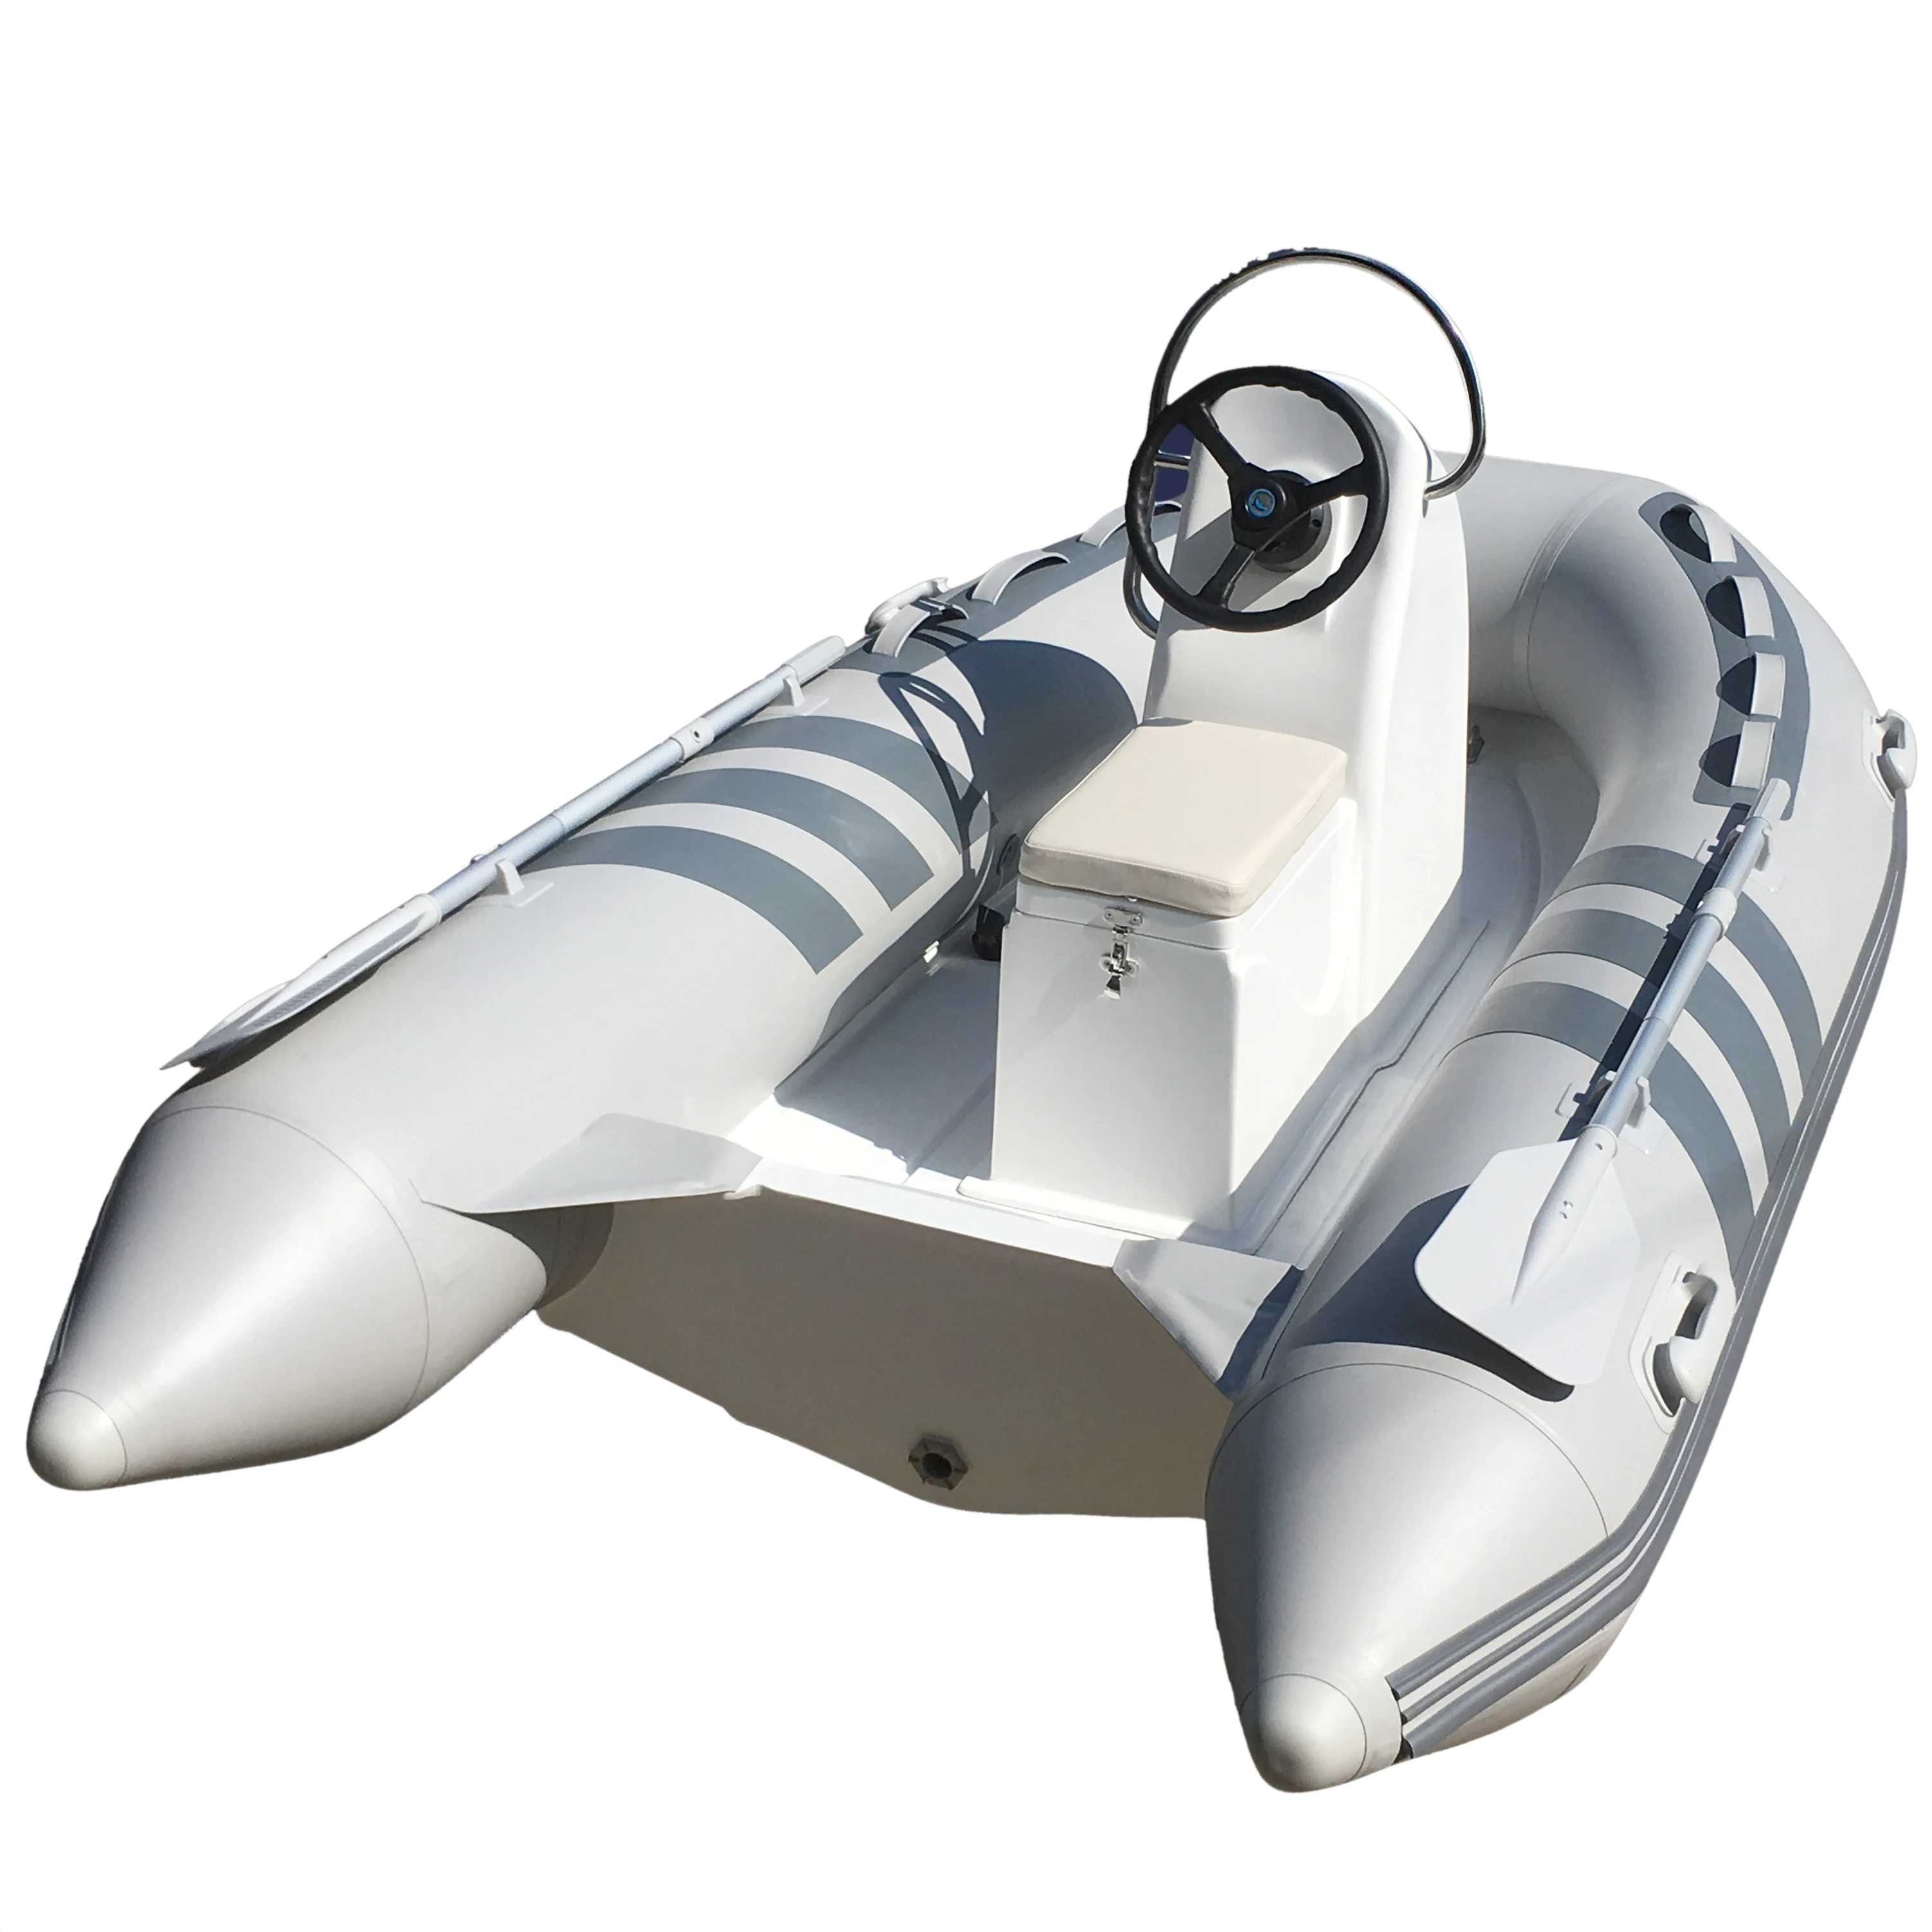 
11ft Goethe Rigid Hull Inflatable Boats With Steering Console 